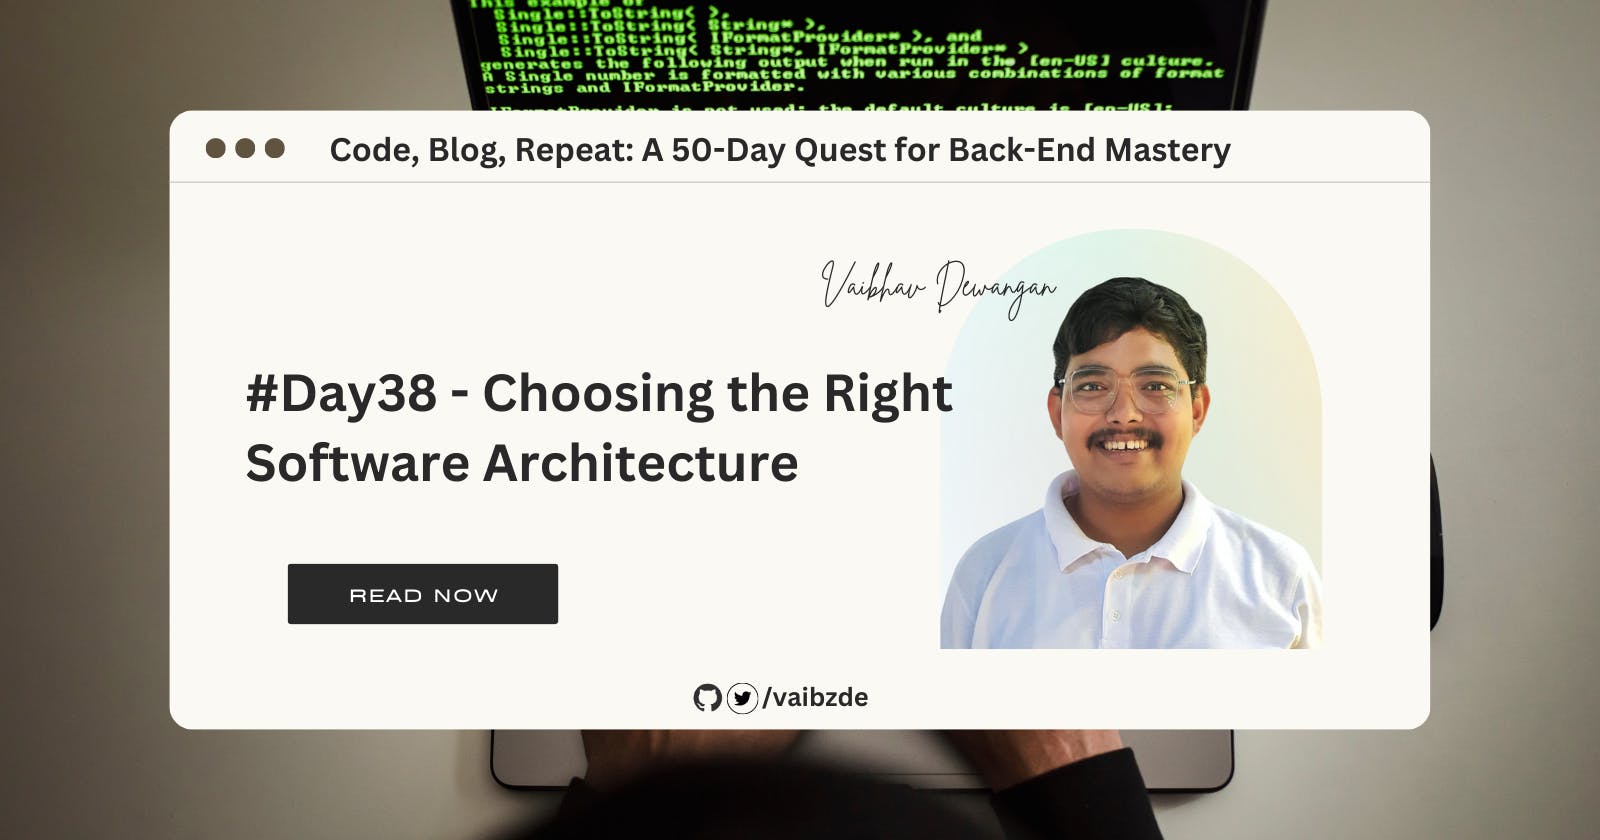 #Day38 - Choosing the Right Software Architecture